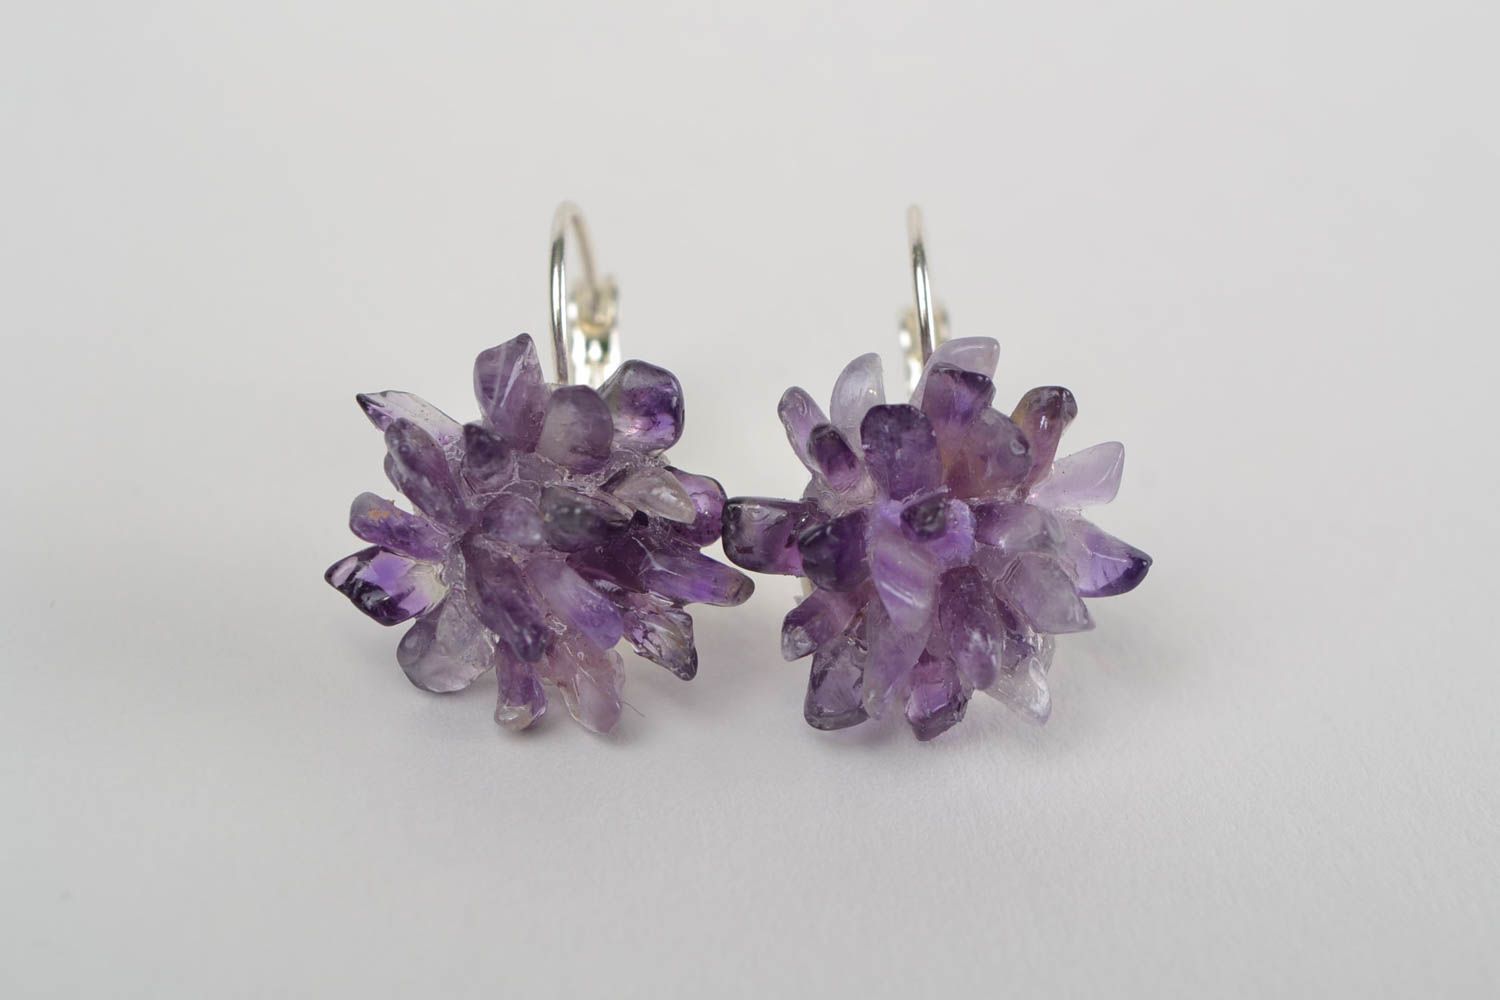 Lilac beautiful handmade earrings with amethyst stones in the shape of flowers photo 1